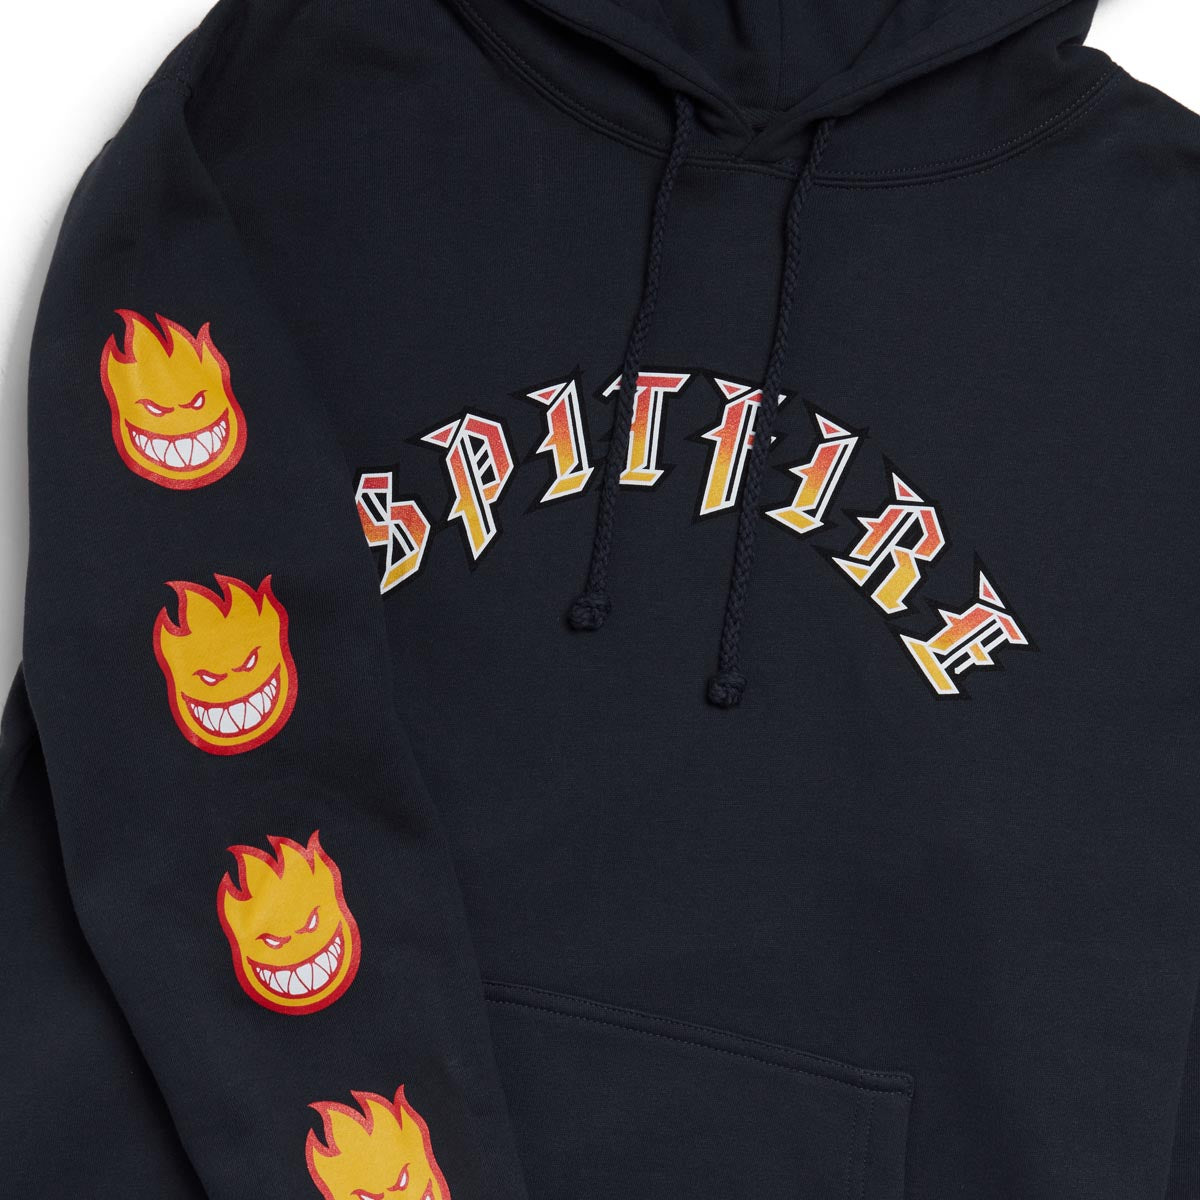 Spitfire Old E Bighead Fill Hoodie - Slate Blue/Gold/Red image 2